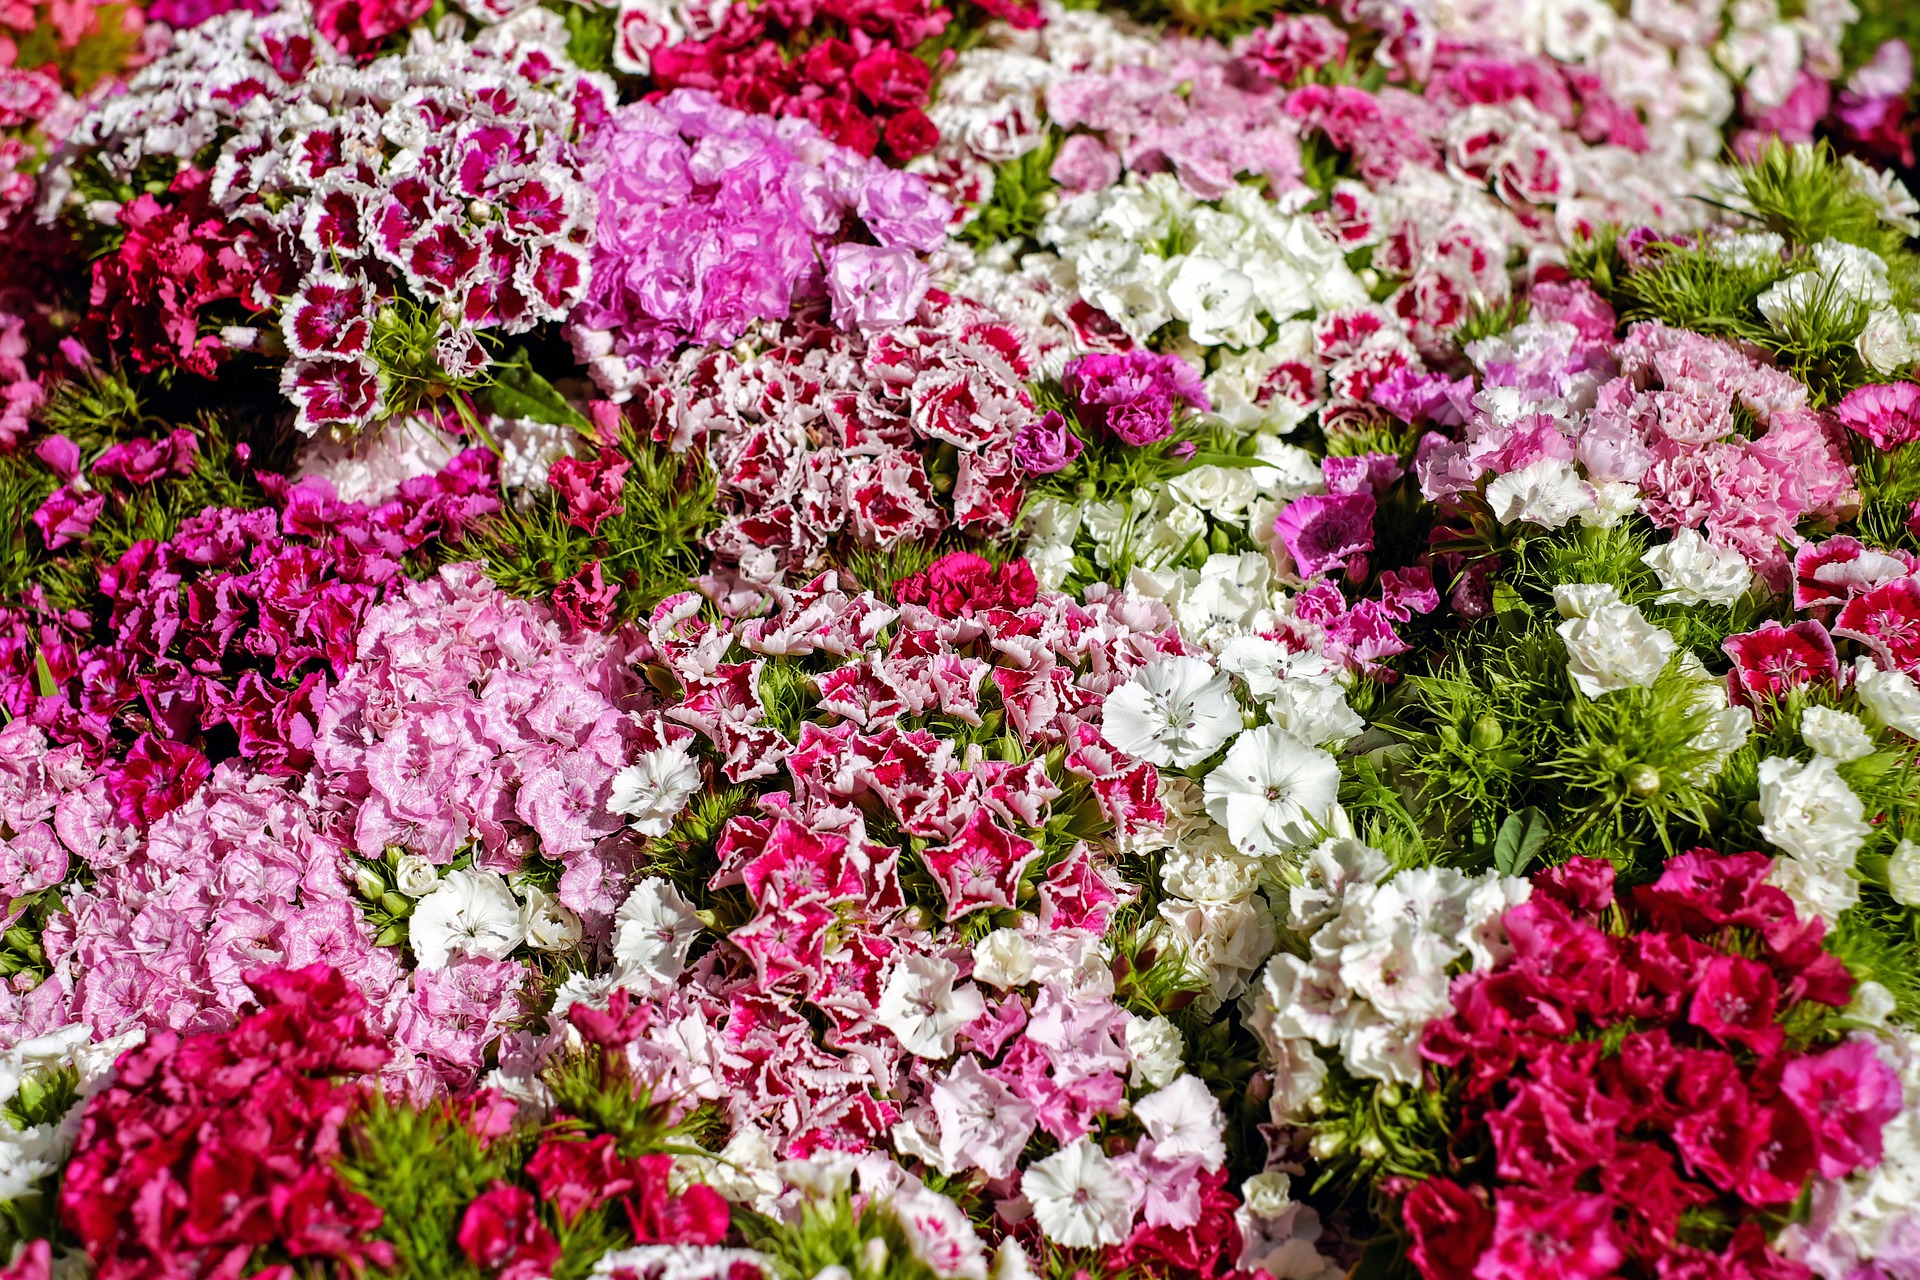 grouping of the Dianthus family of flowers